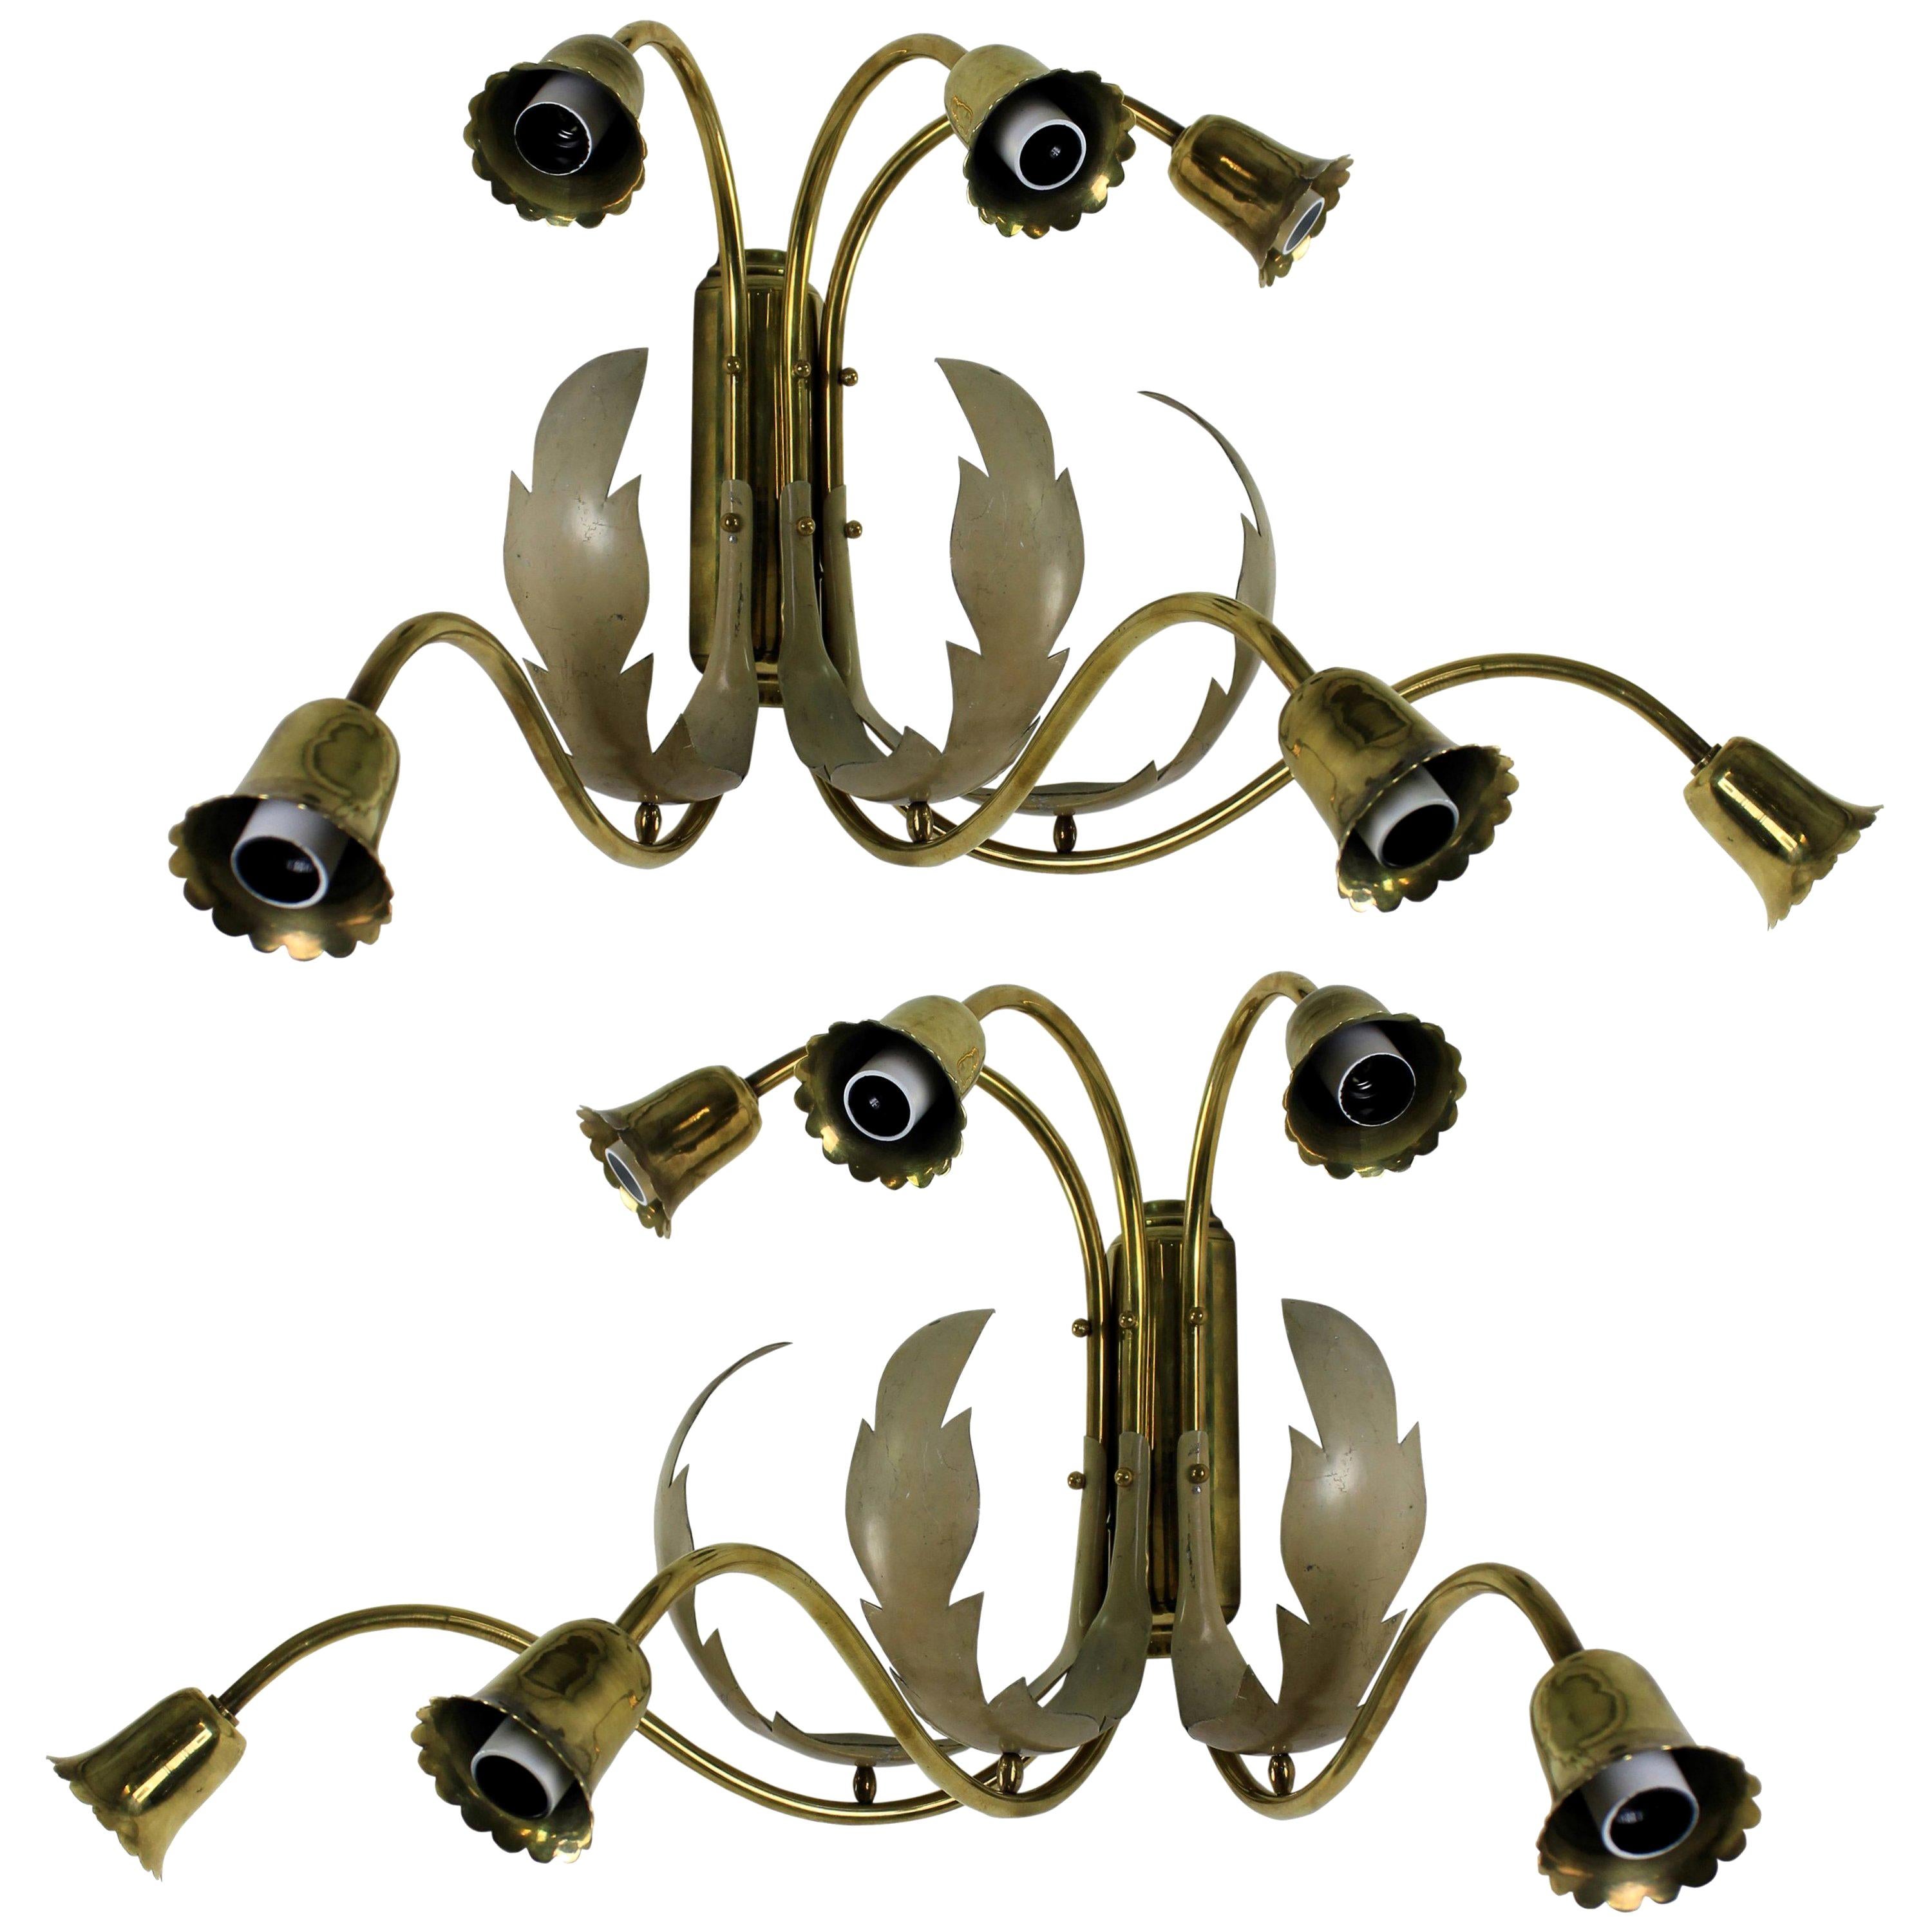 Pair of Whimsical Midcentury Italian Sconces